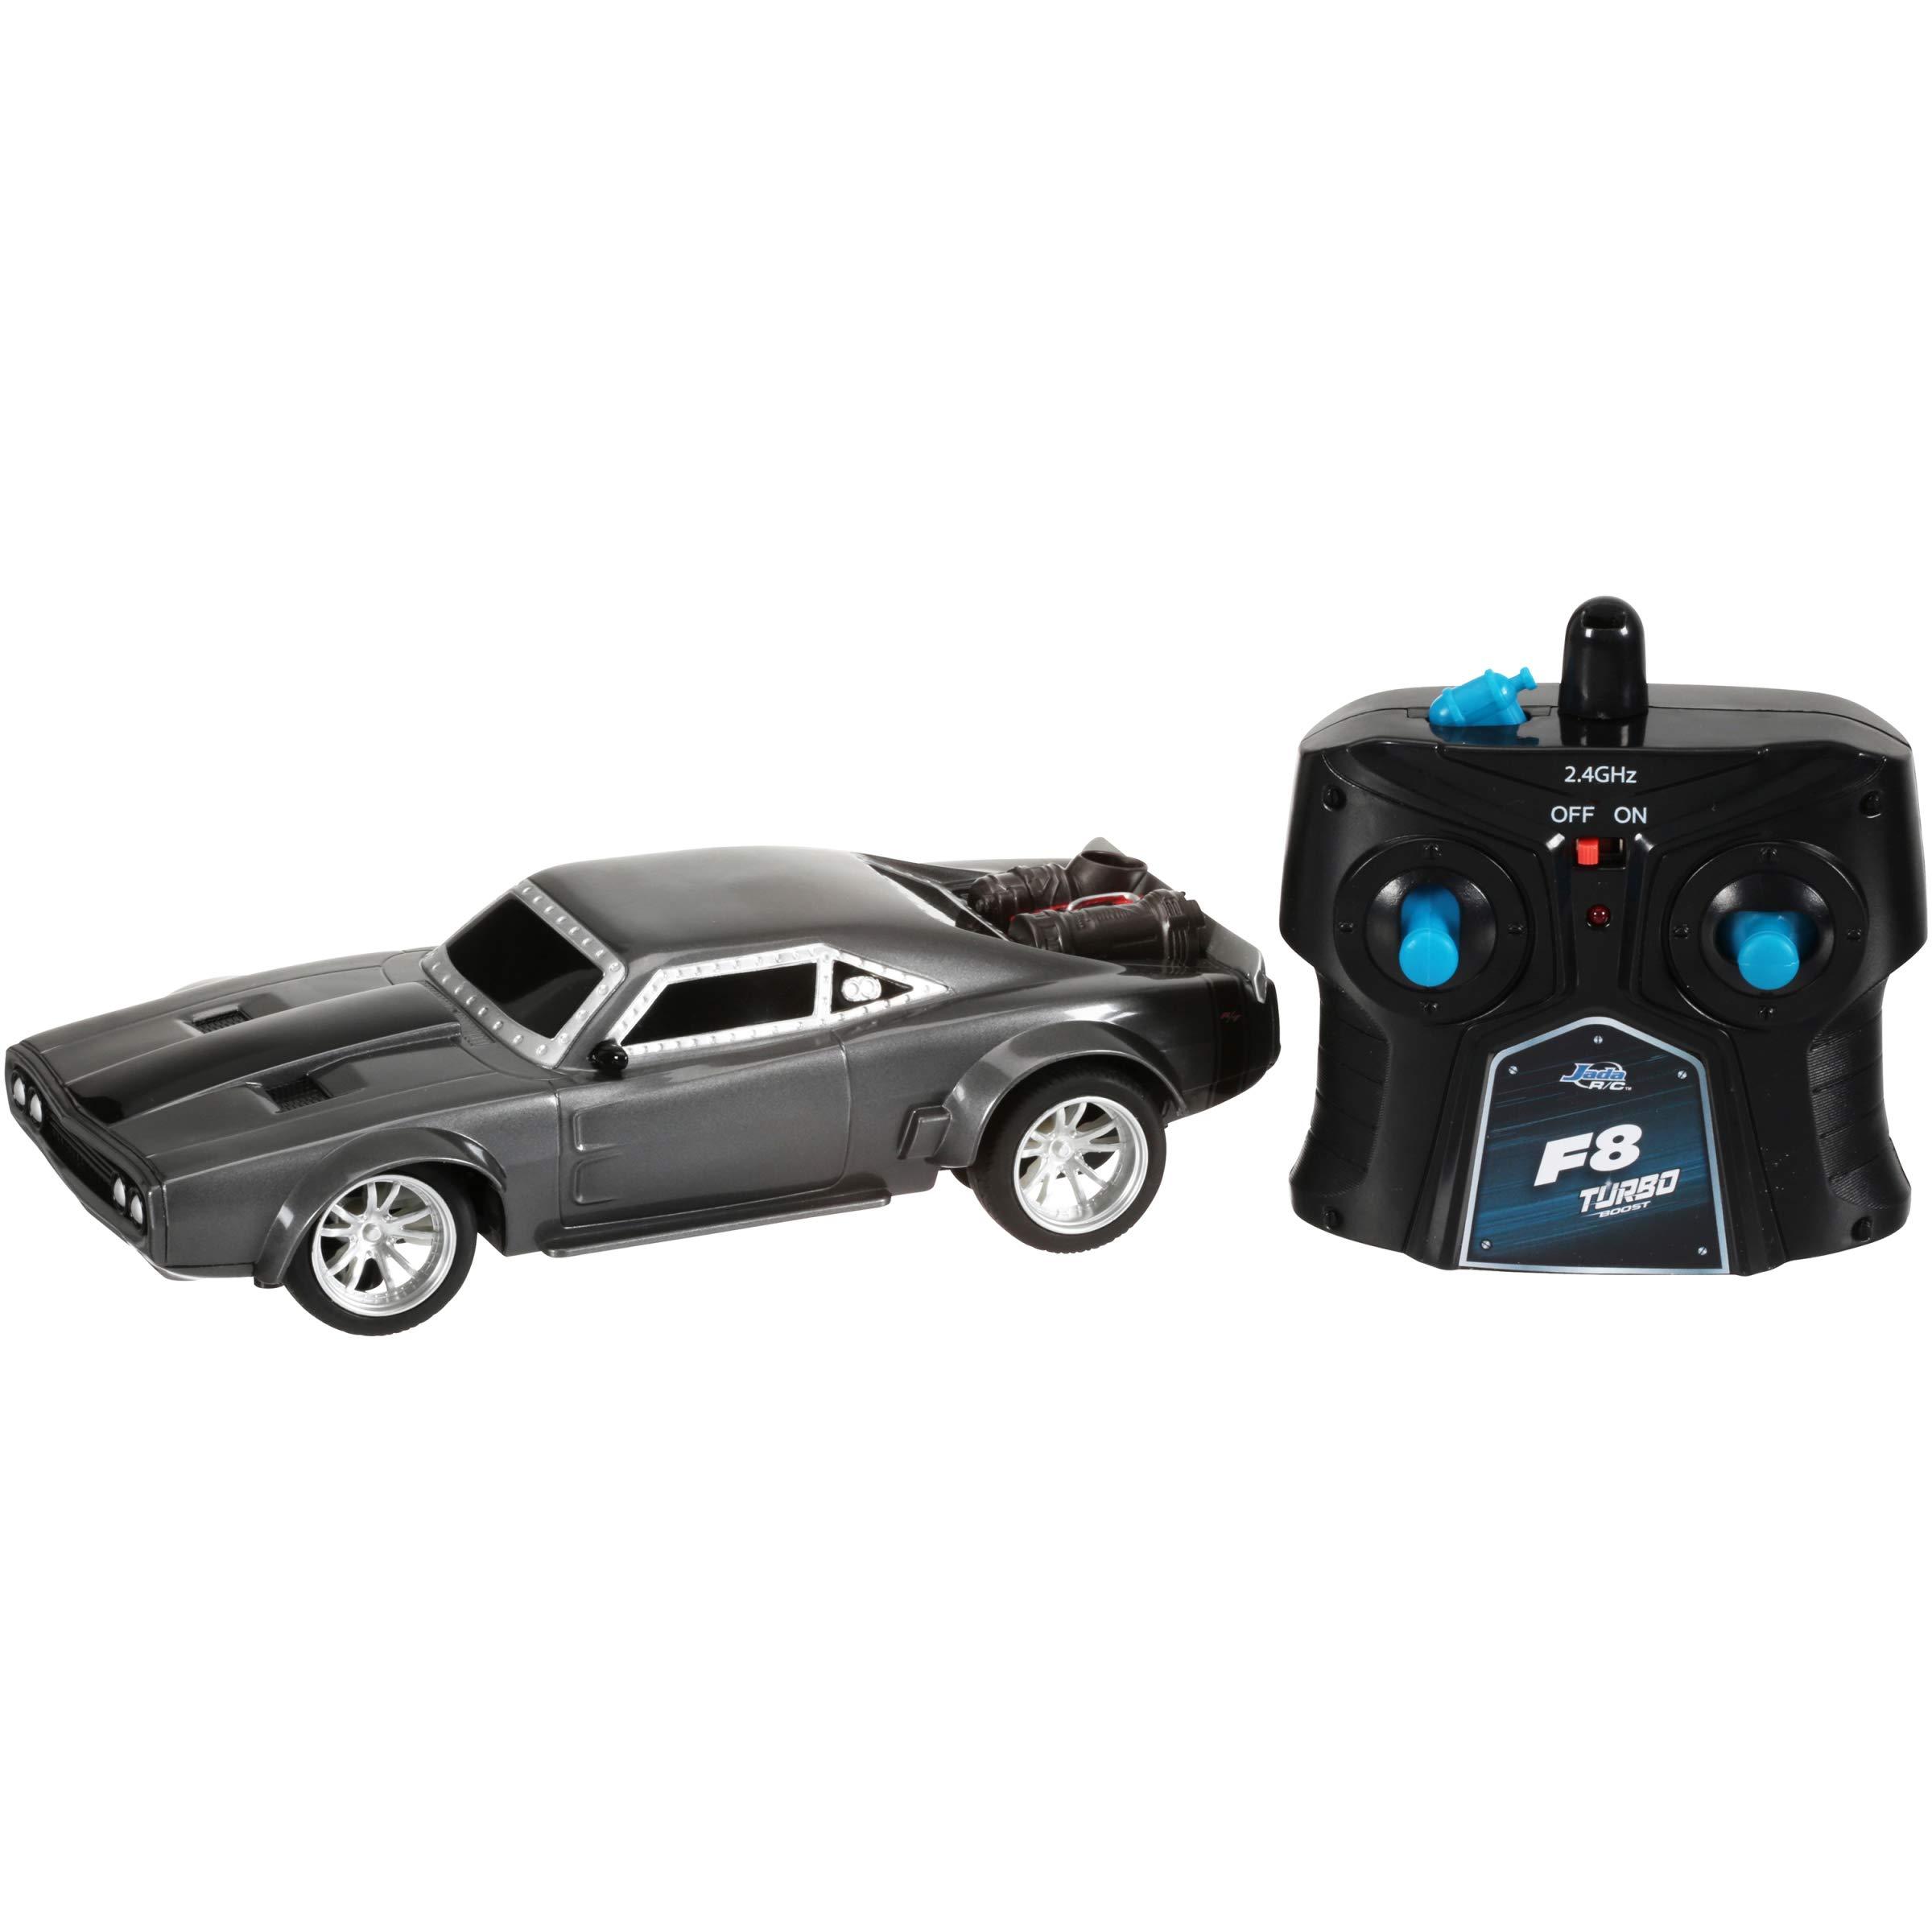 Really Fast Electric Rc Cars: Fast and Furious - Breaking Down the Components of Electric RC Cars